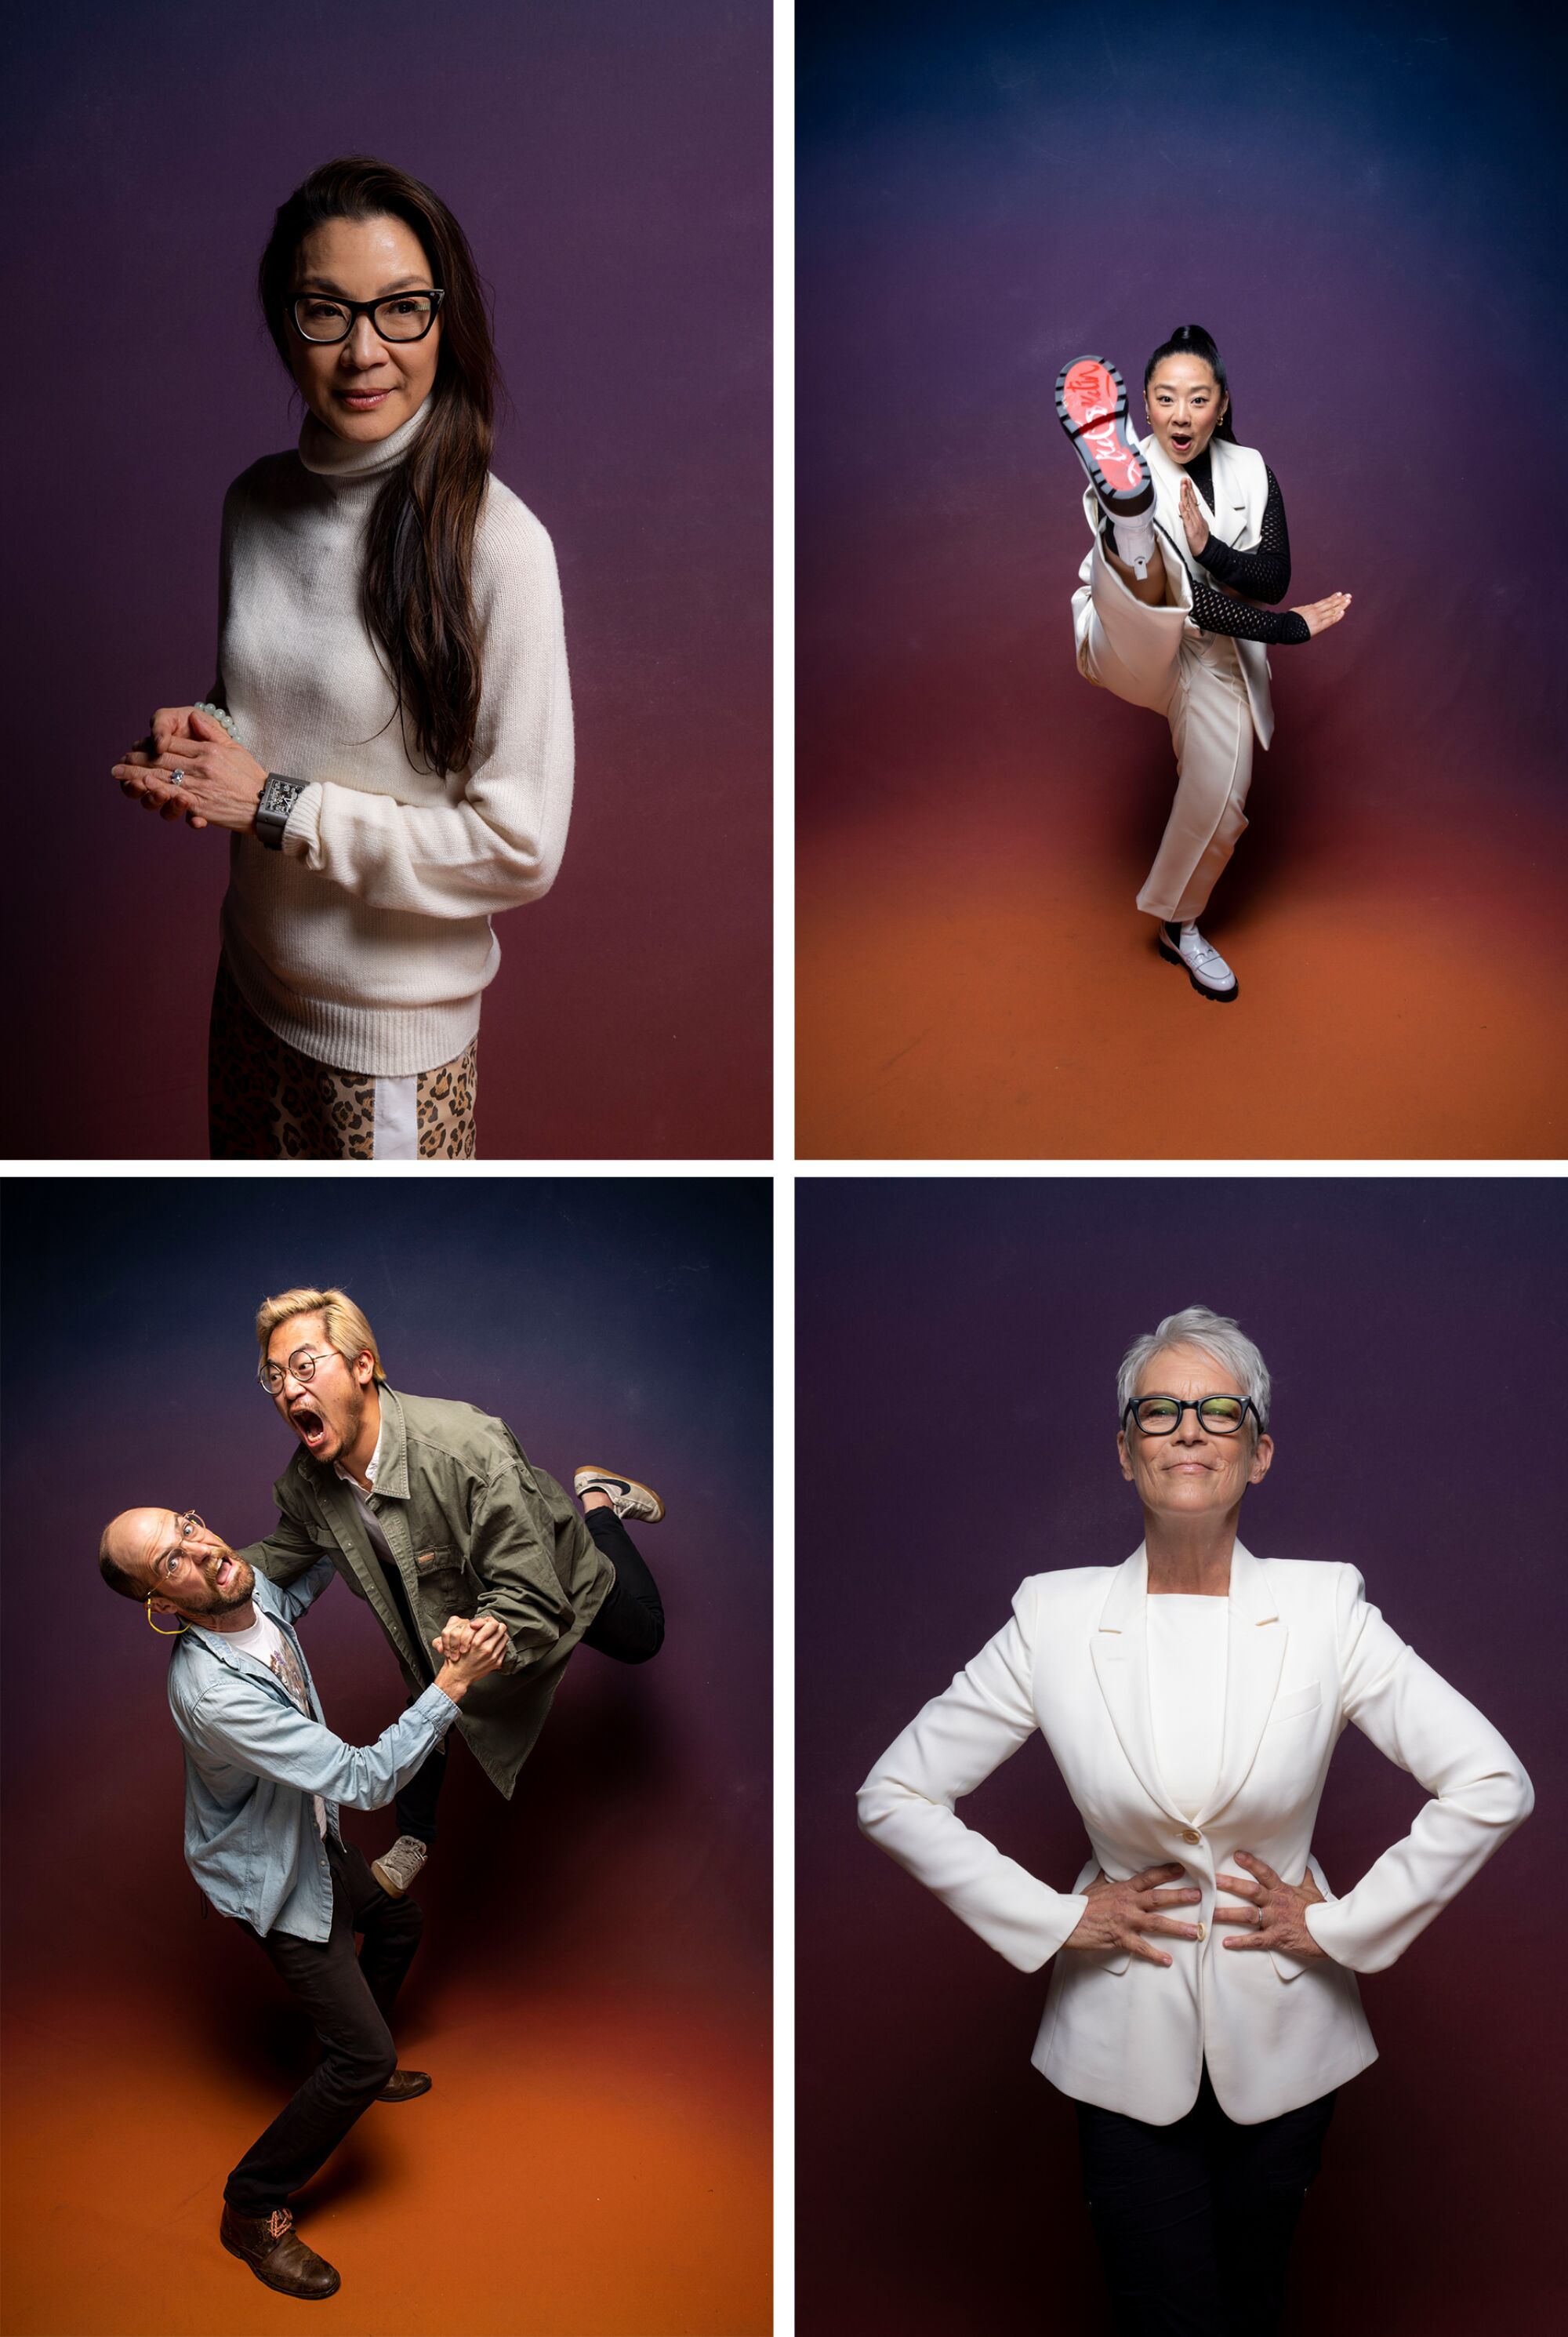 A grouping of four images in a grid show people on a rainbow background.